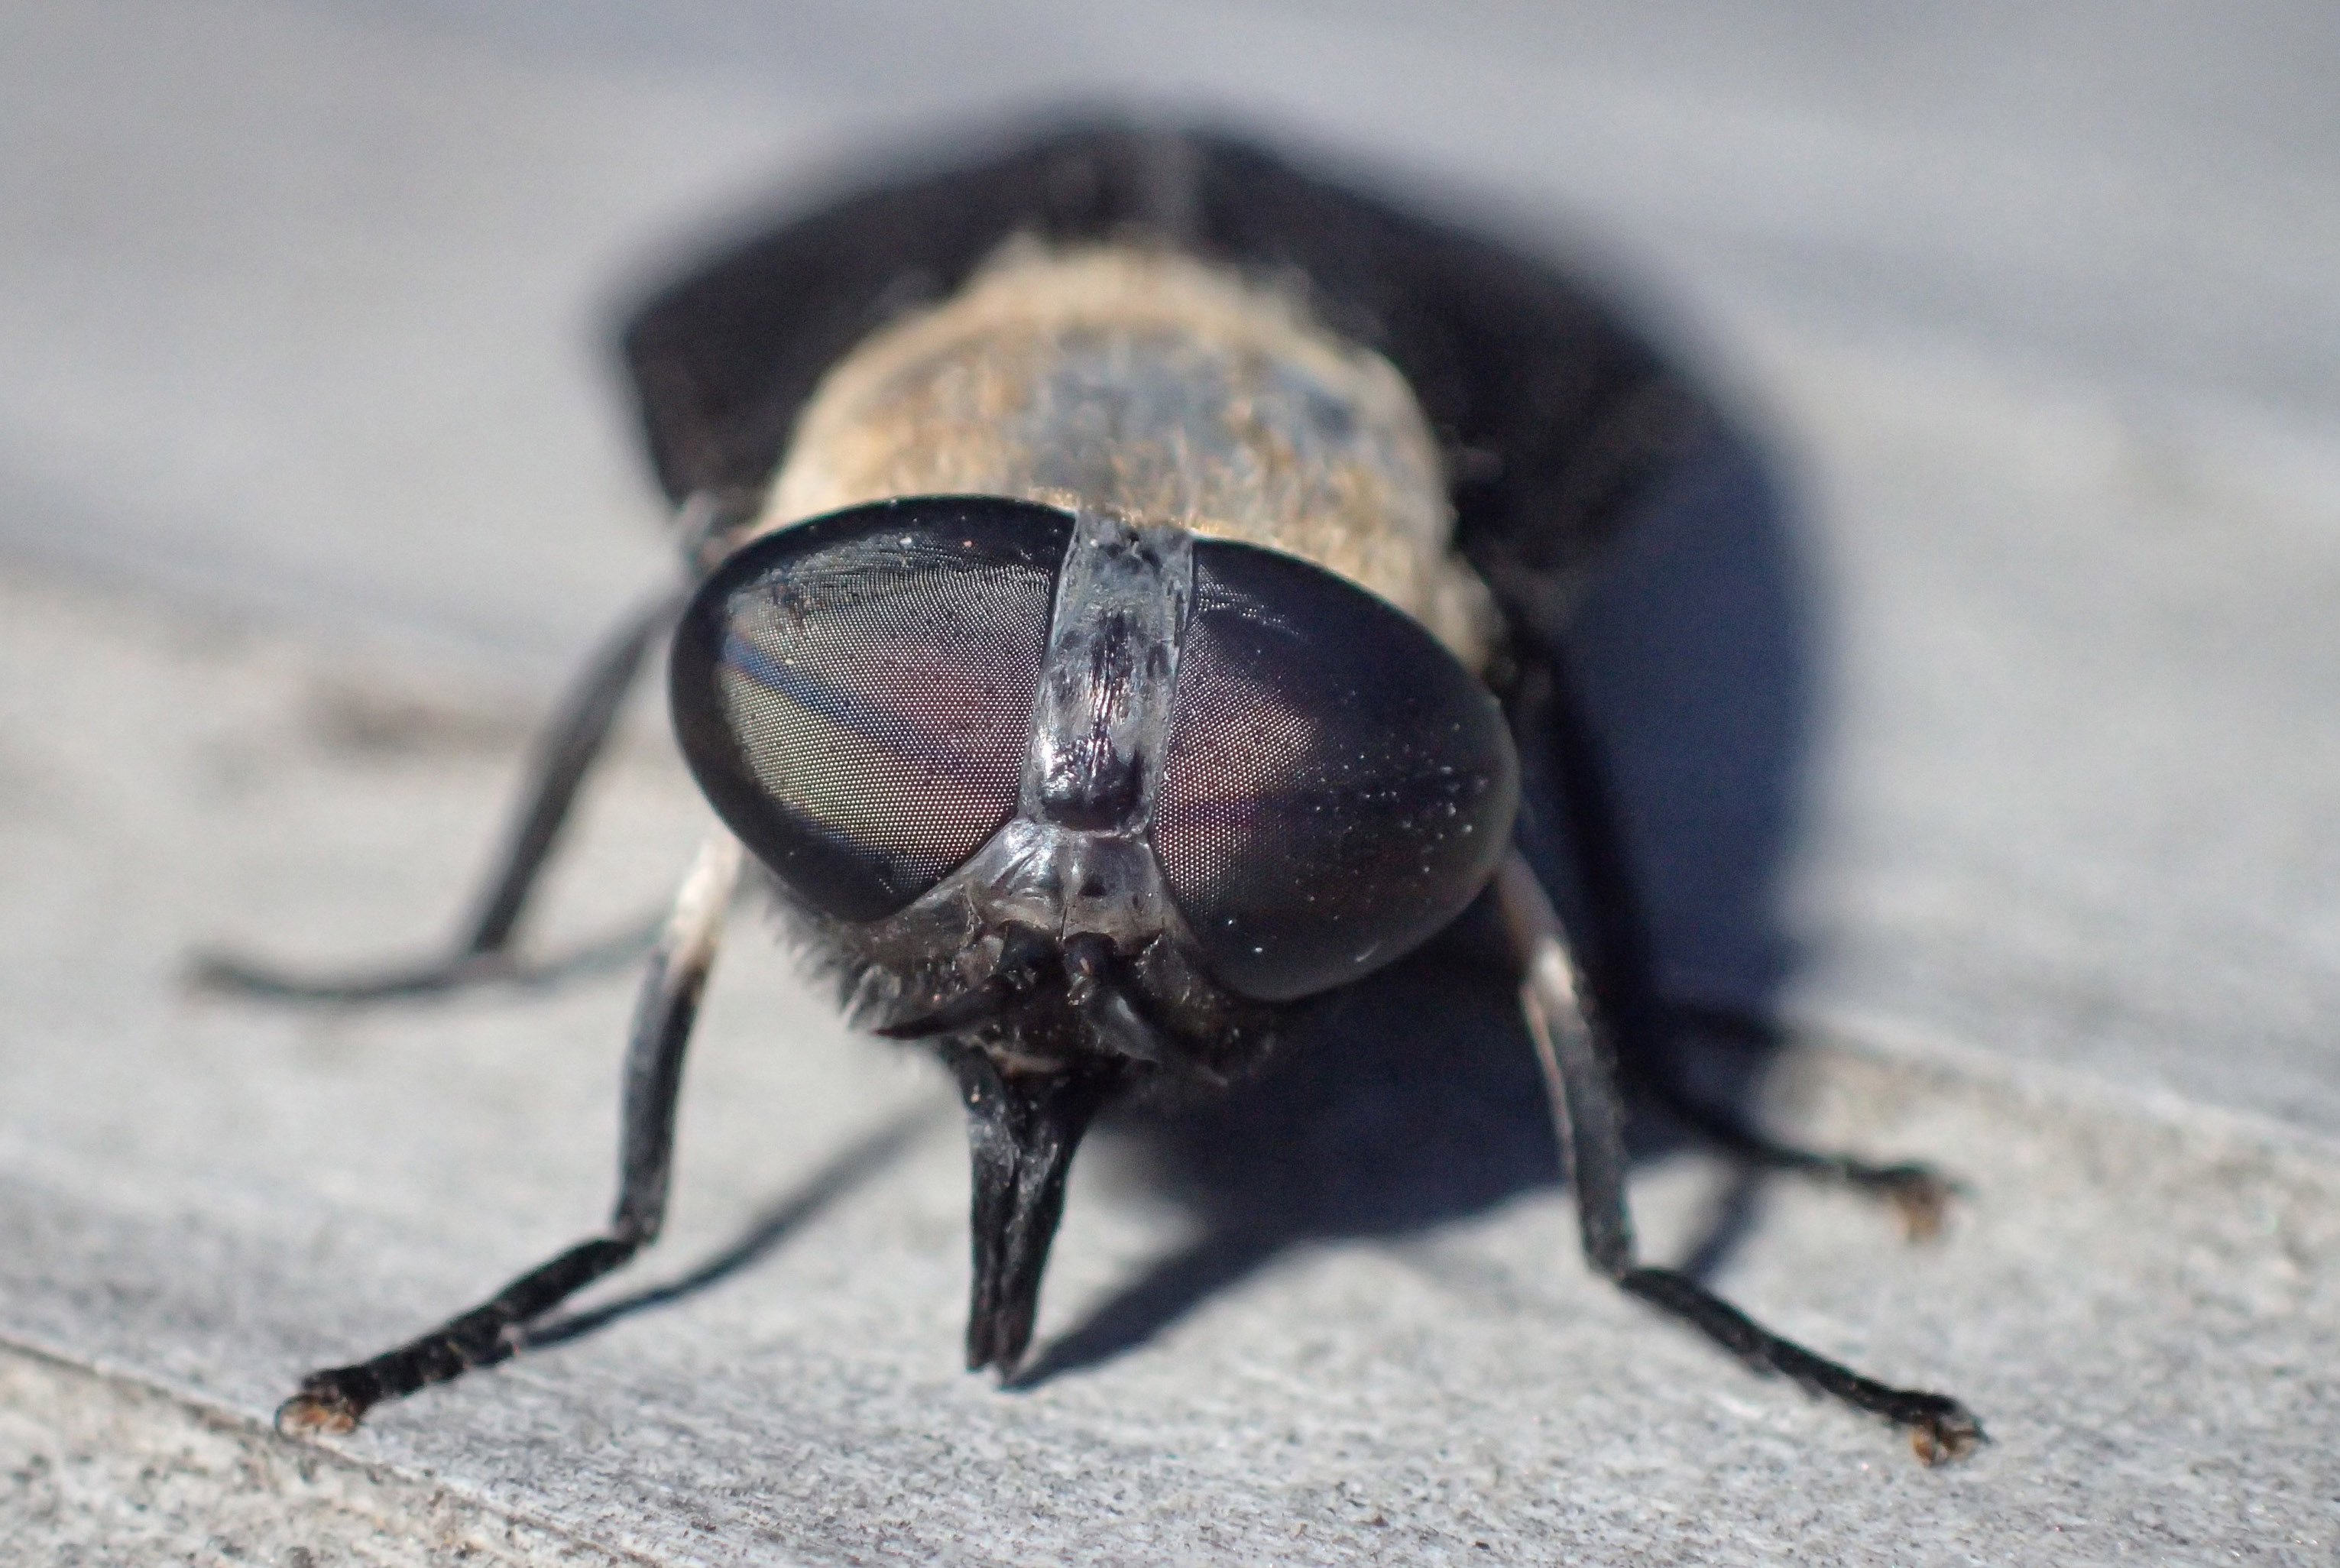 grey to brown fly with large eyes and elongated mouthparts